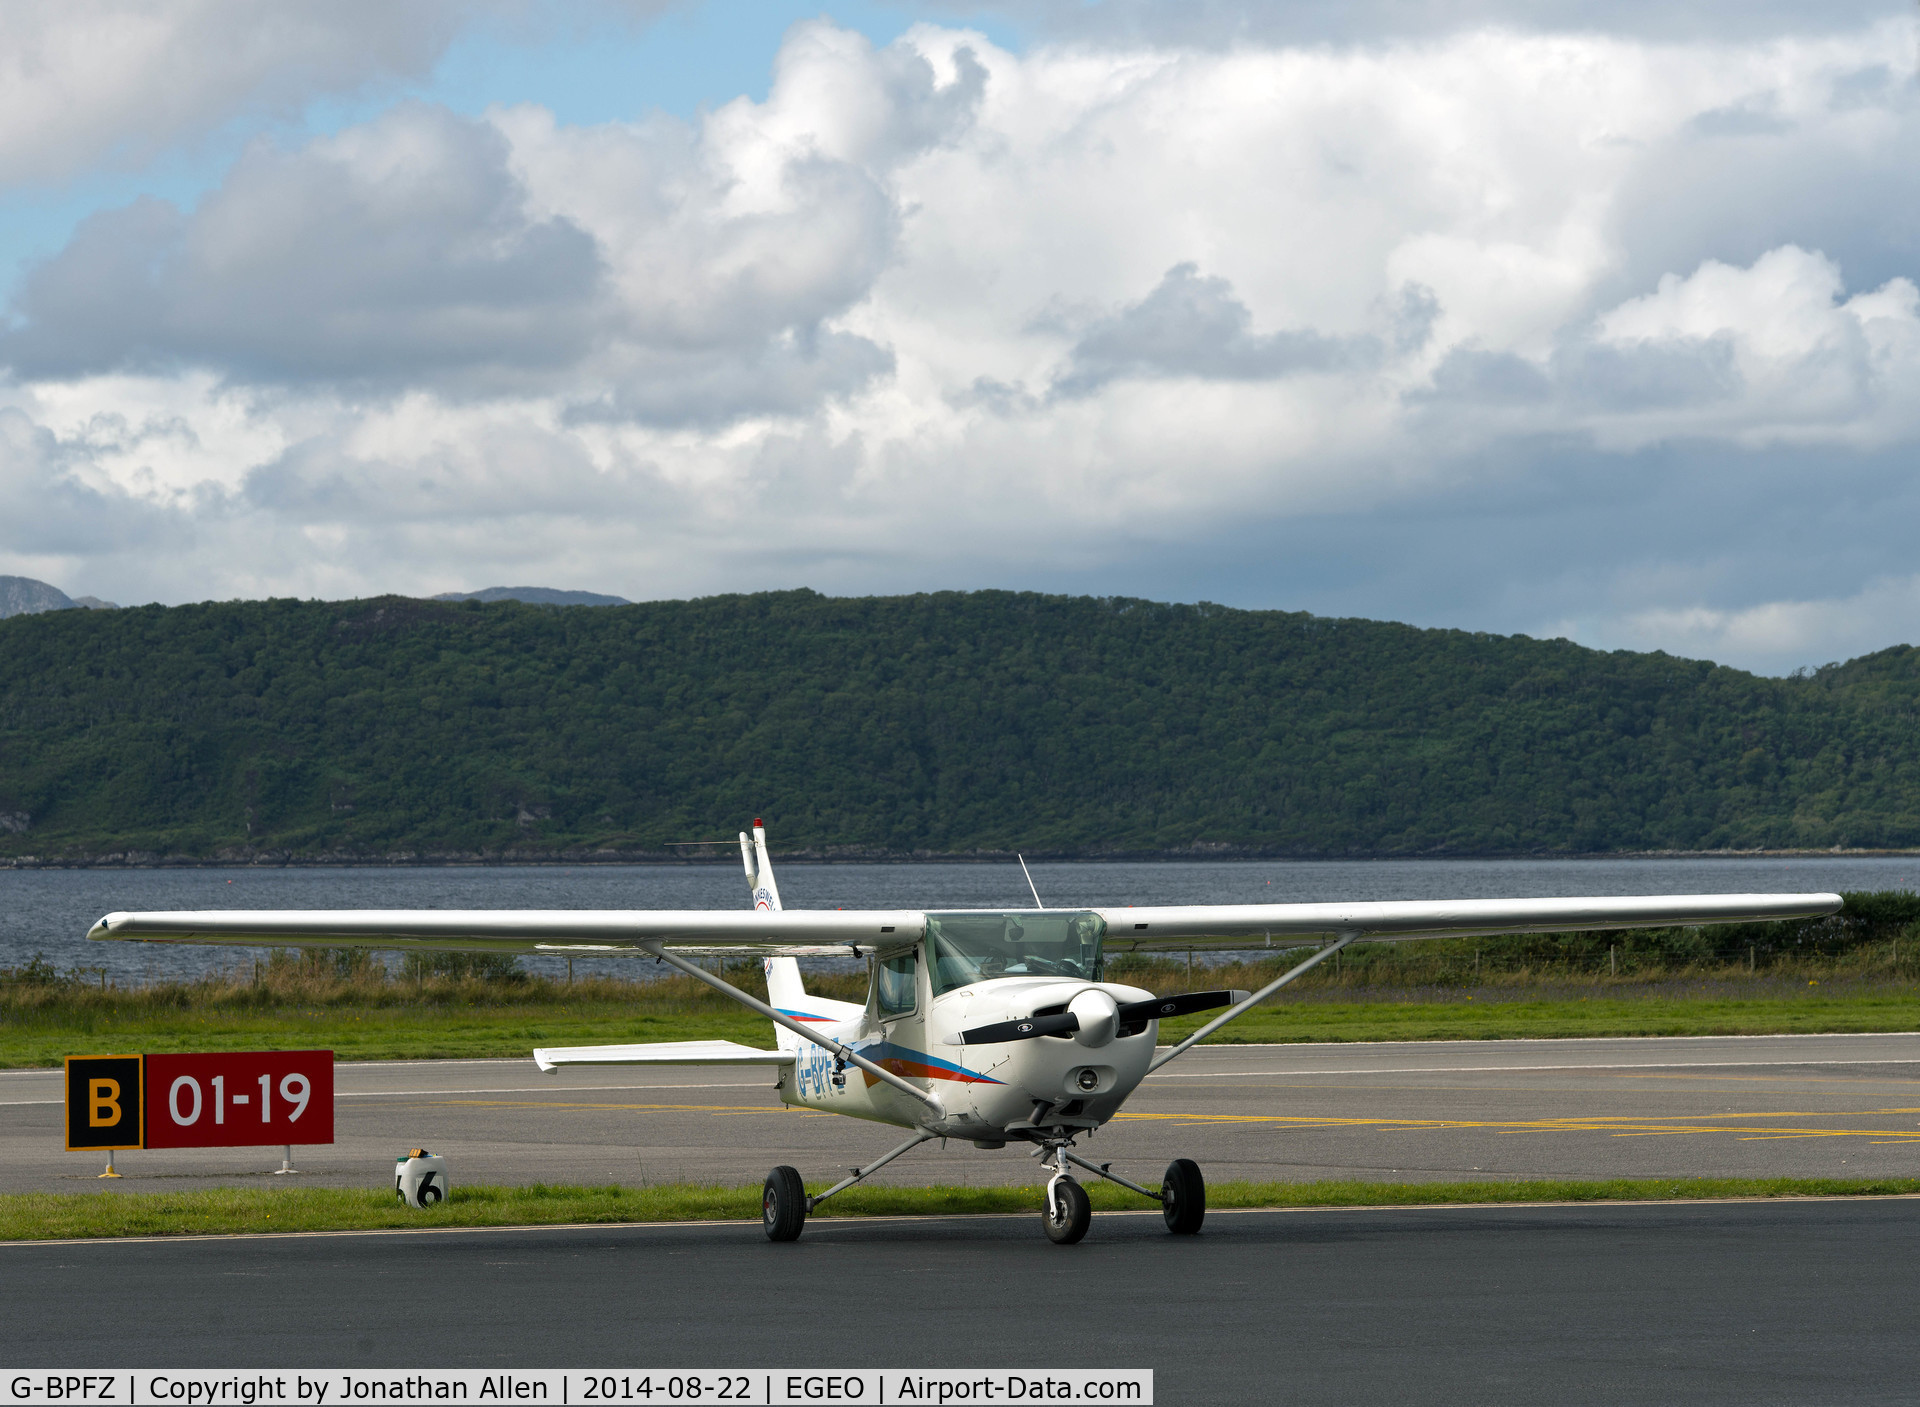 G-BPFZ, 1983 Cessna 152 C/N 152-85741, In the parking area, Oban Airport.